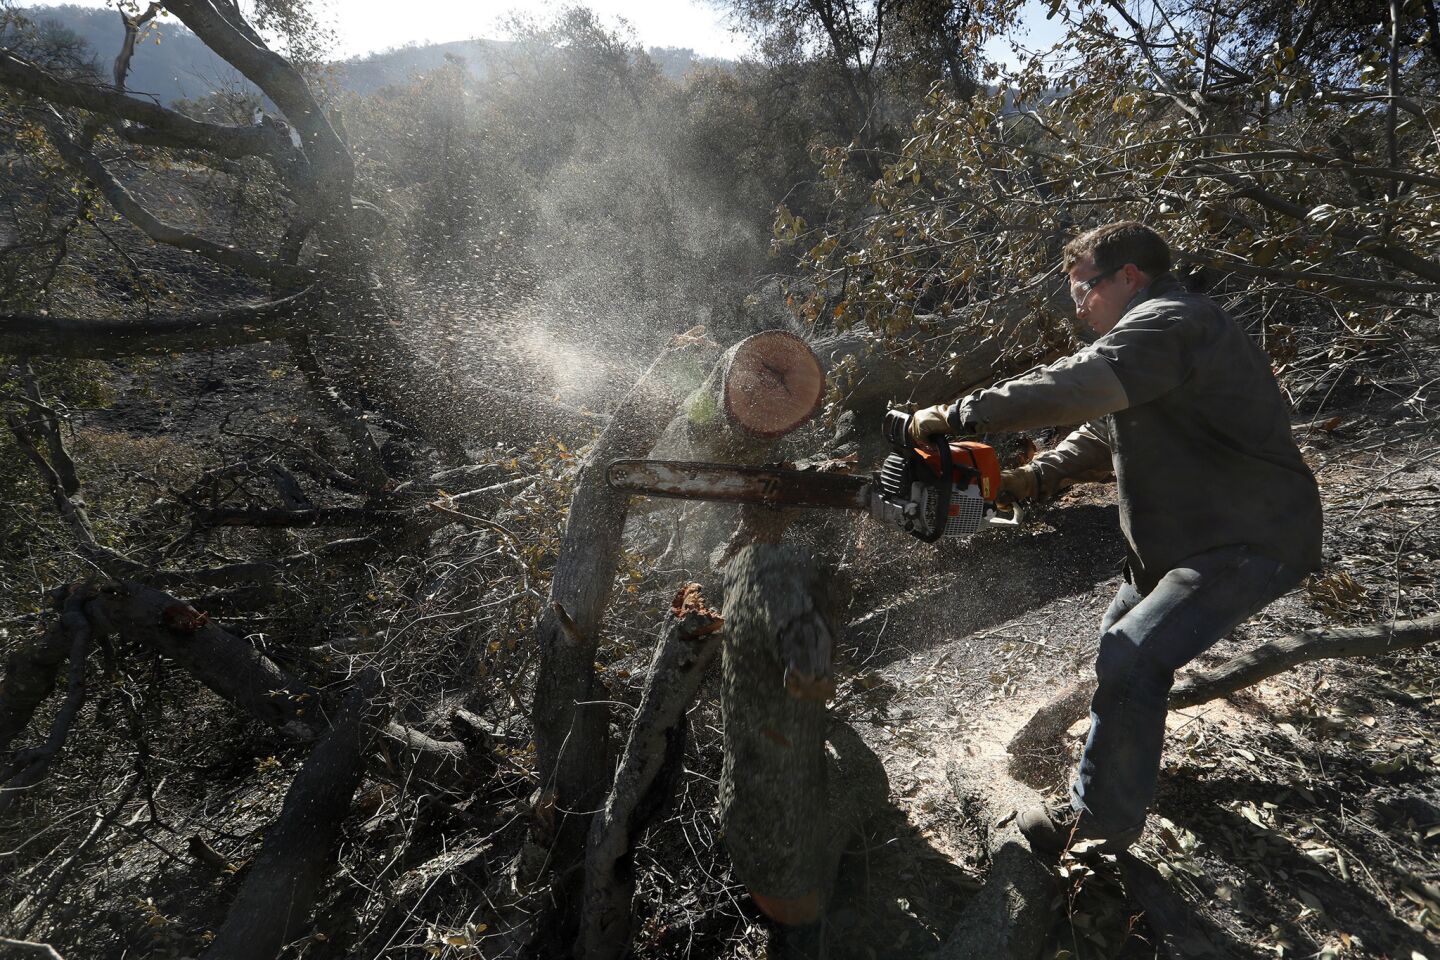 Trevor Quirk, the co-founder of the Upper Ojai Relief Center, cuts away a section of a partially fallen, burned oak tree.